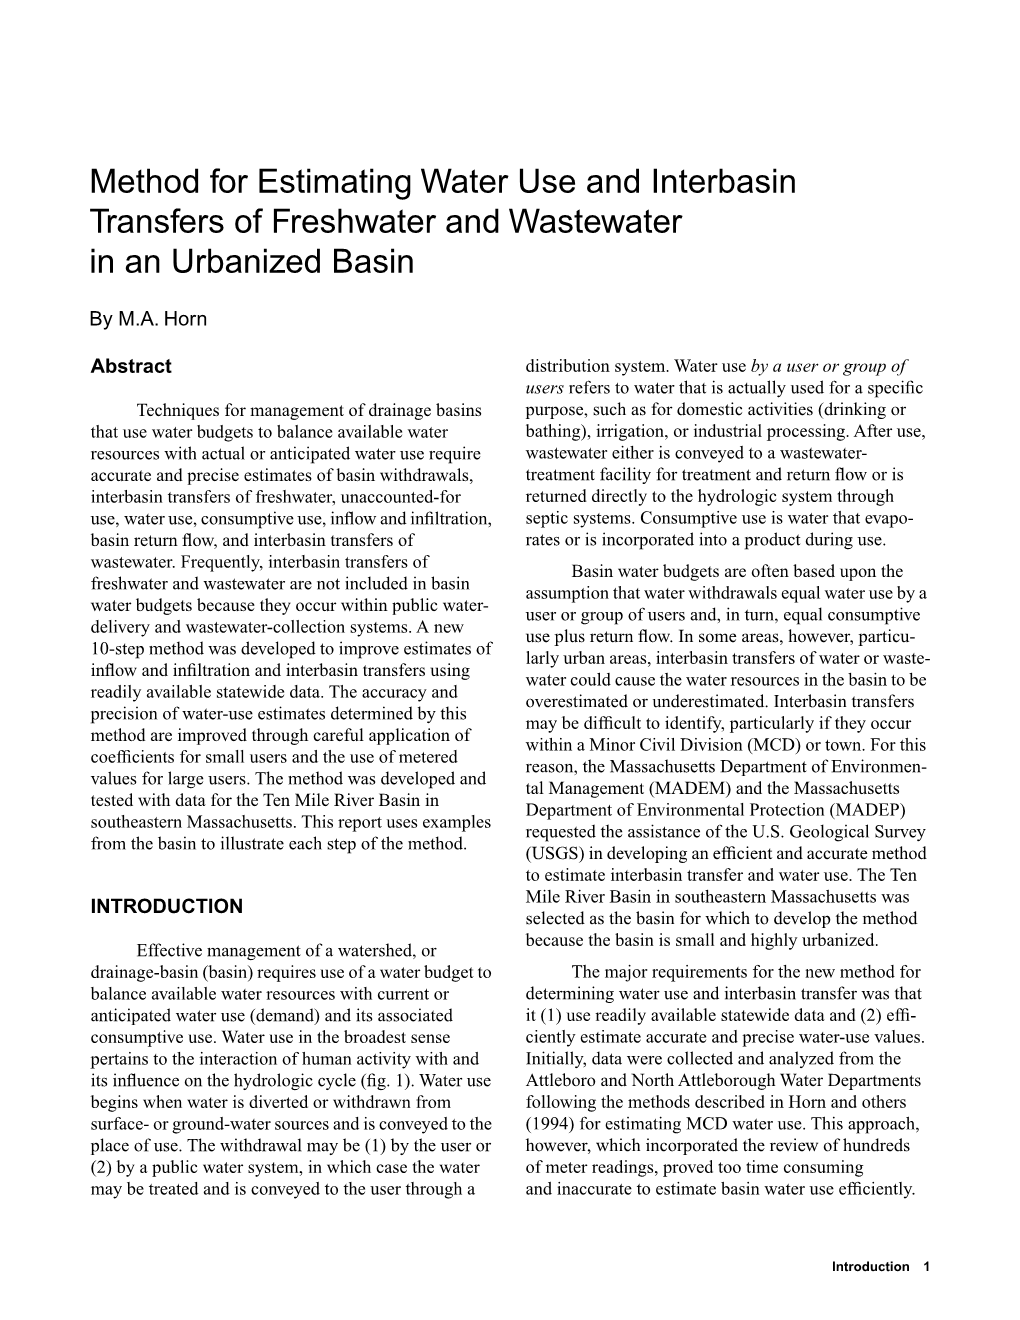 Method for Estimating Water Use and Interbasin Transfers of Freshwater and Wastewater in an Urbanized Basin